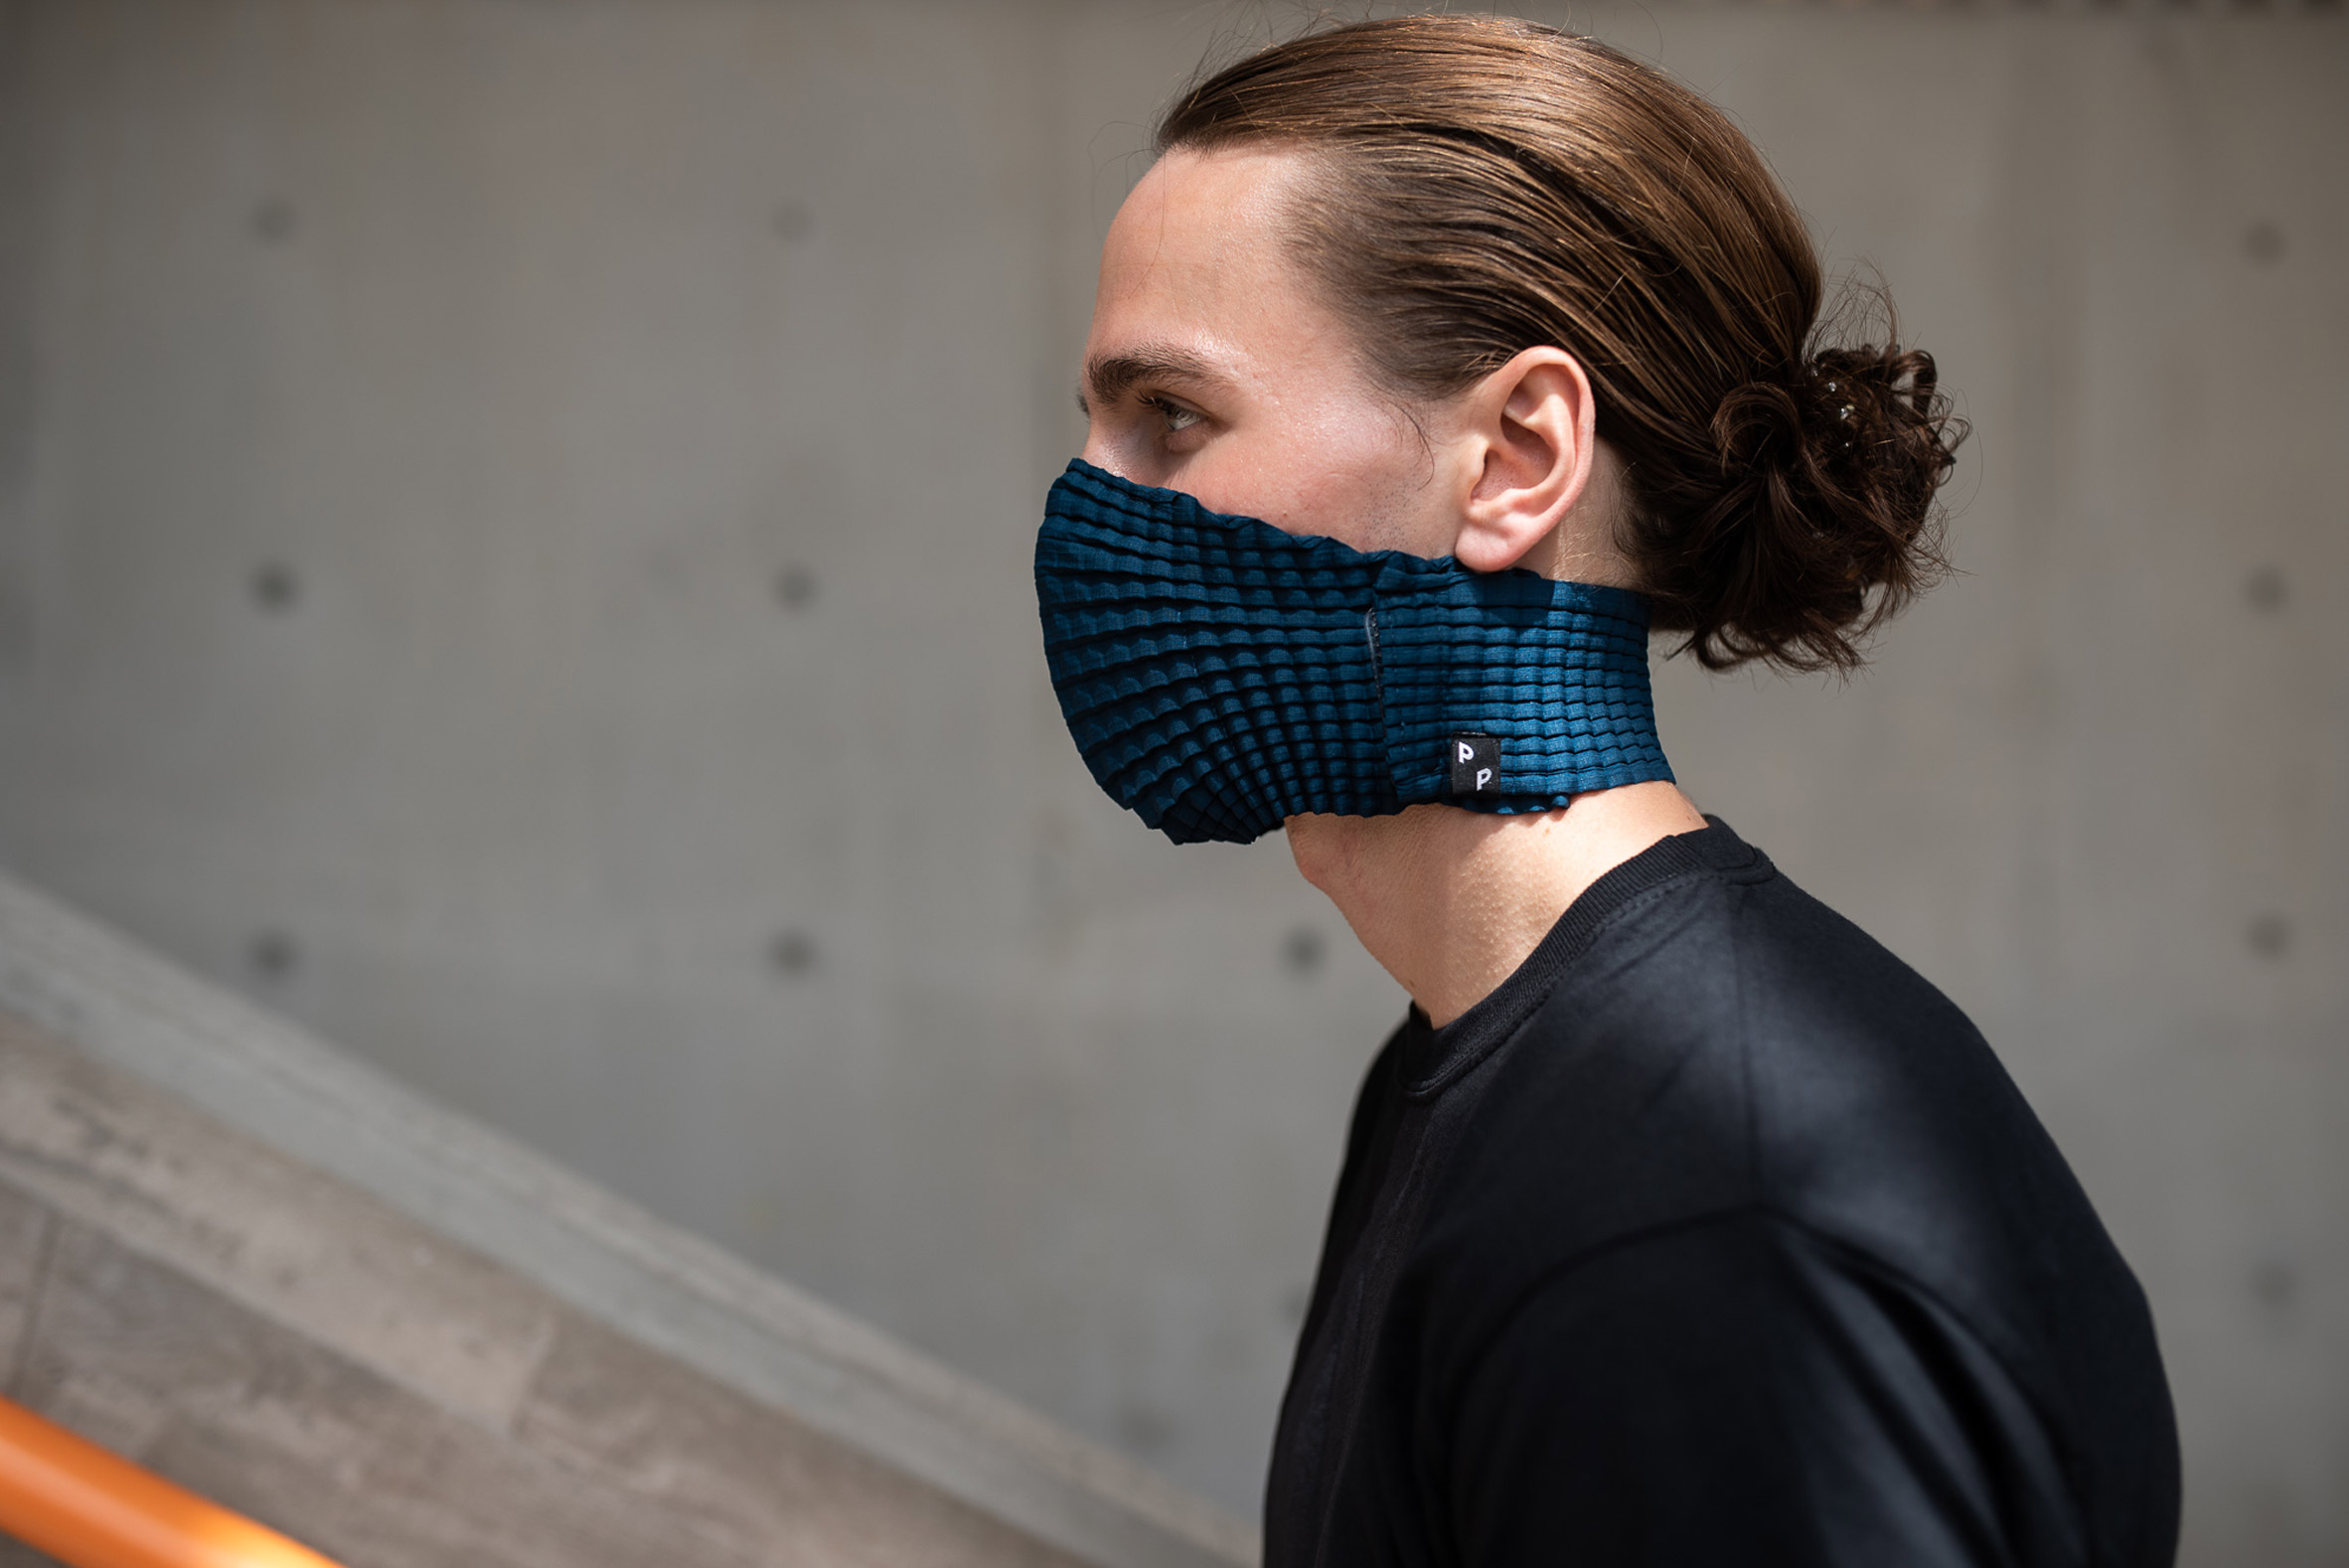 Petit Pli makes expandable and reusable face mask from recycled plastic